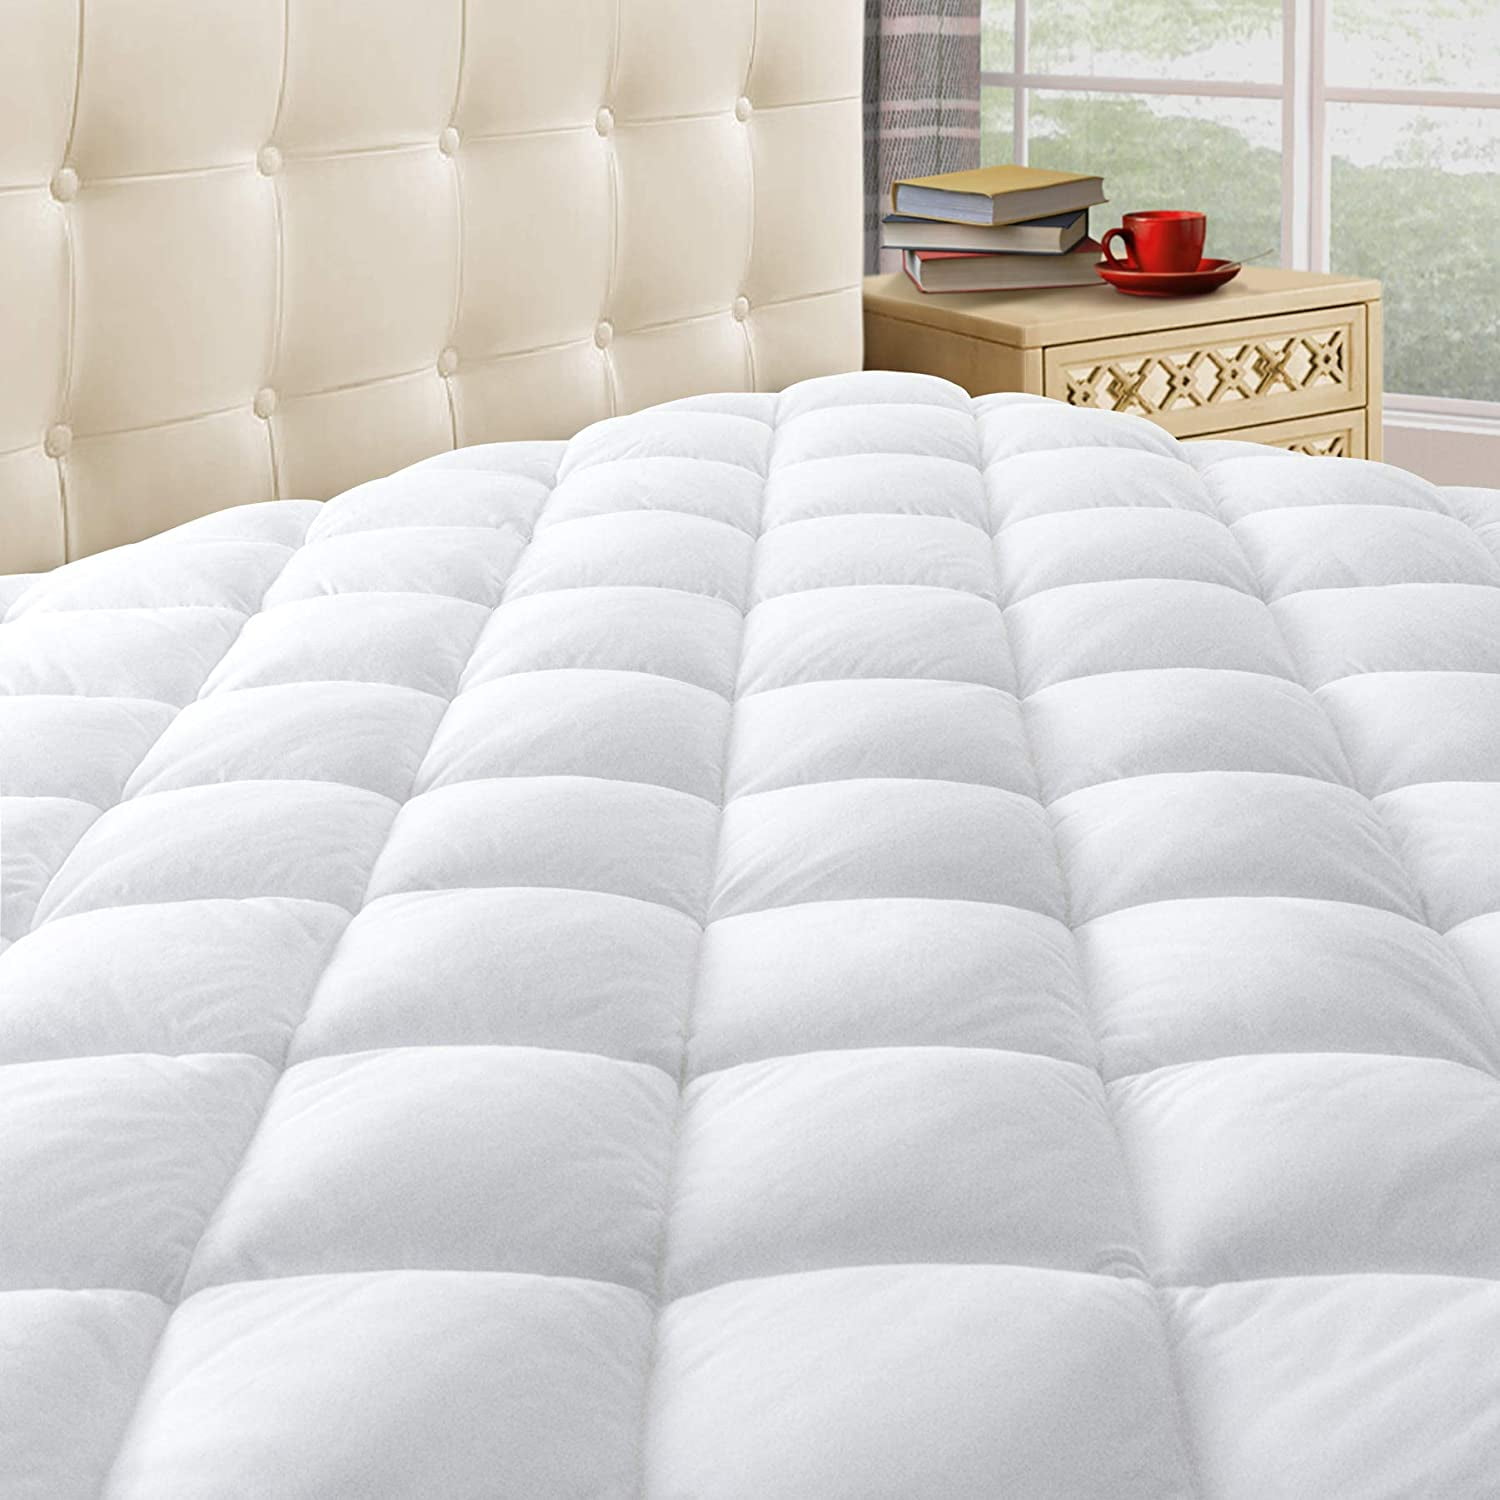 The Grand Fitted Quilted Mattress Pad Cover Hypoallergenic Stretches to 18" 